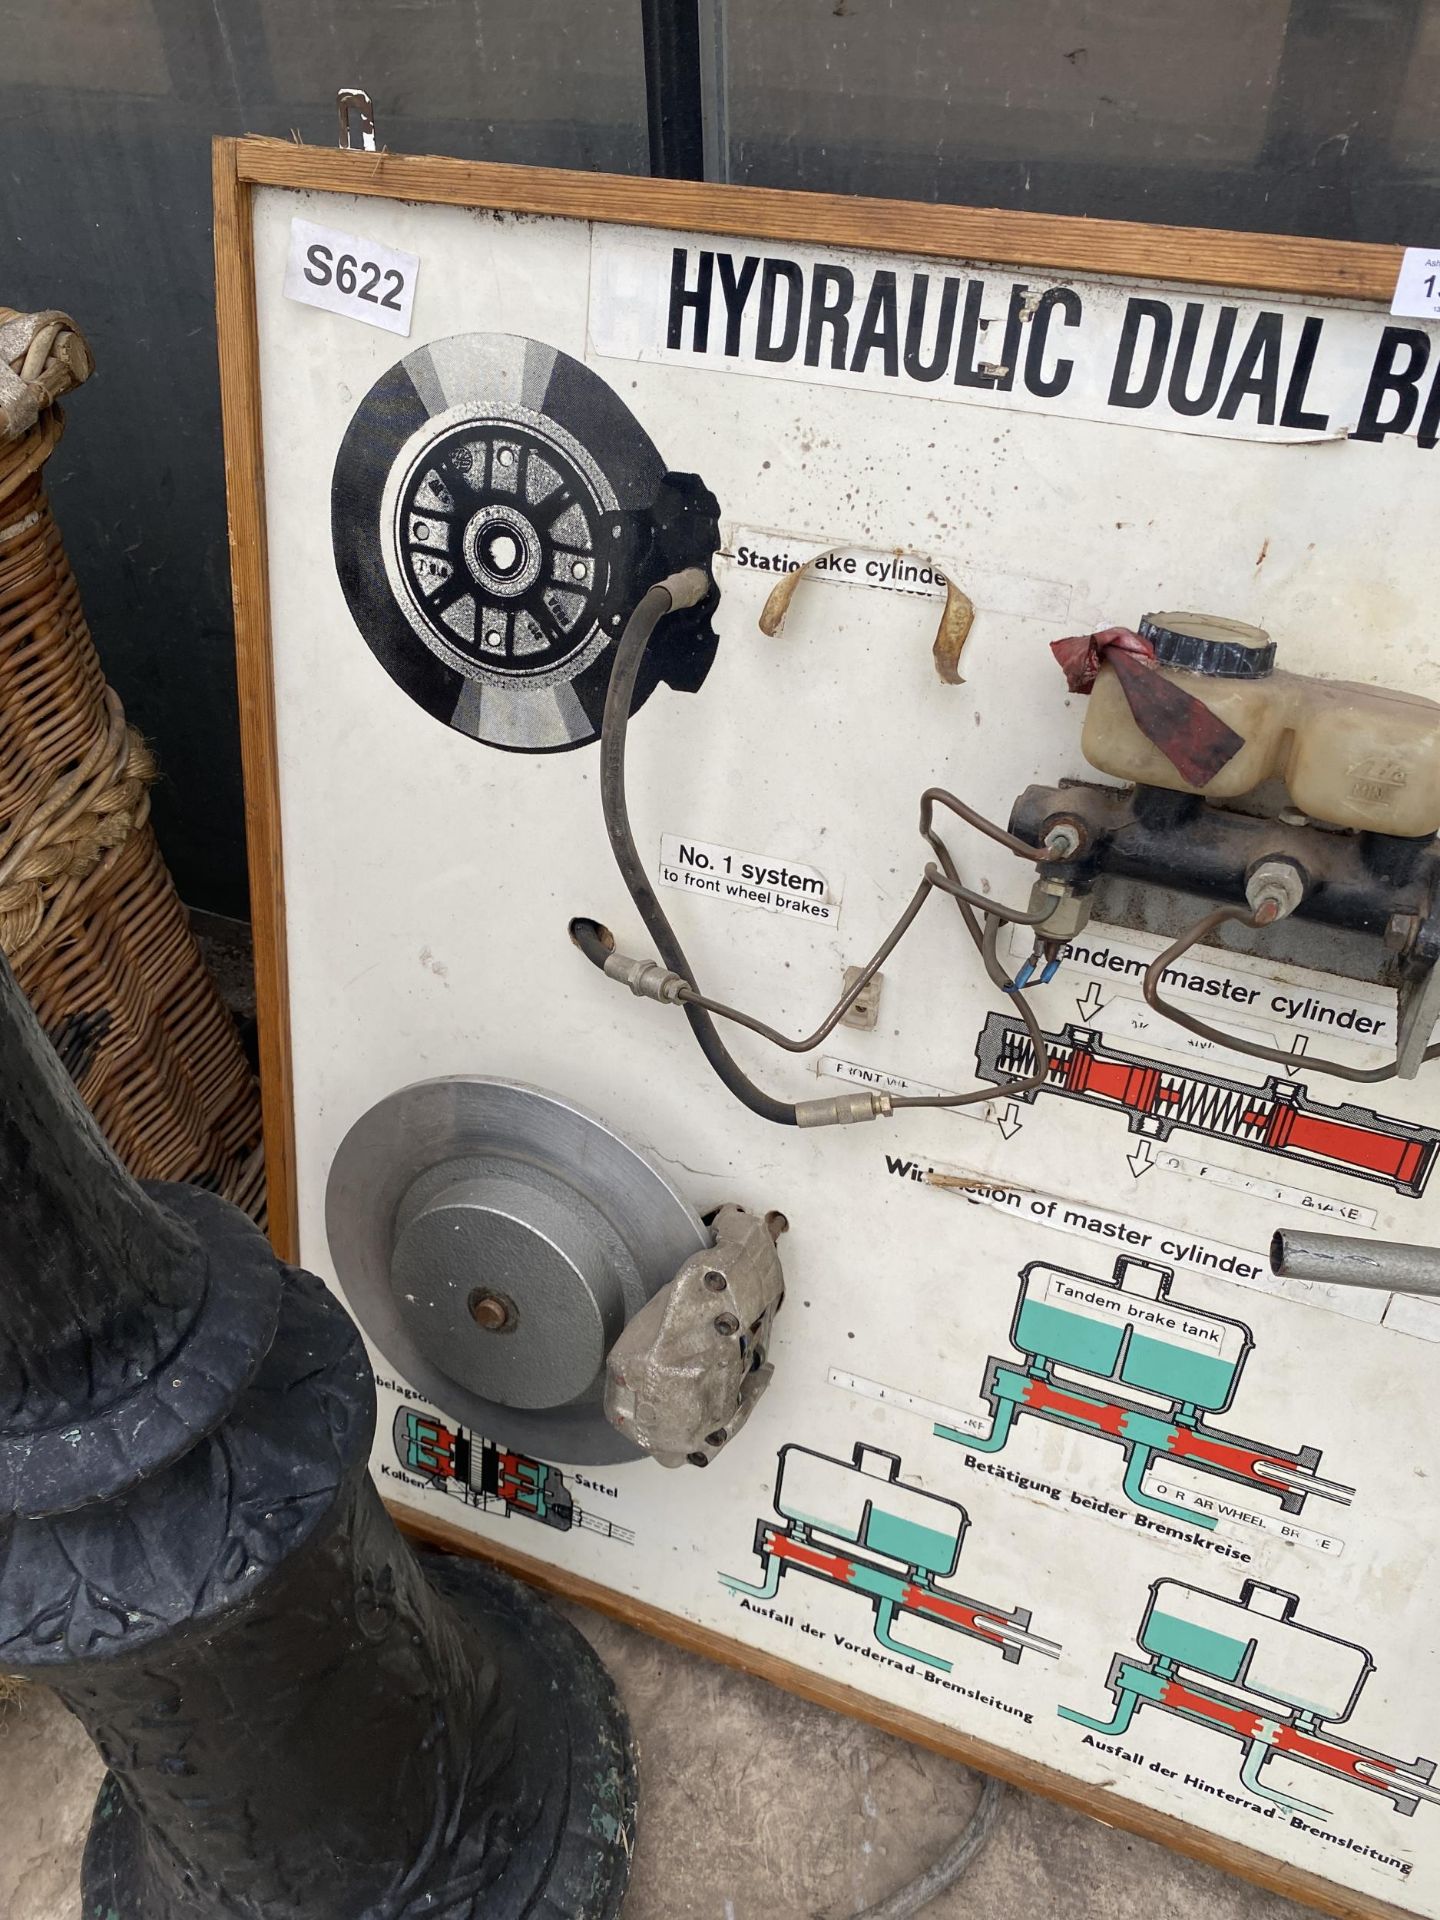 A HYDRAULIC DUEL BREAKING TEACHING AID BOARD - Image 2 of 3